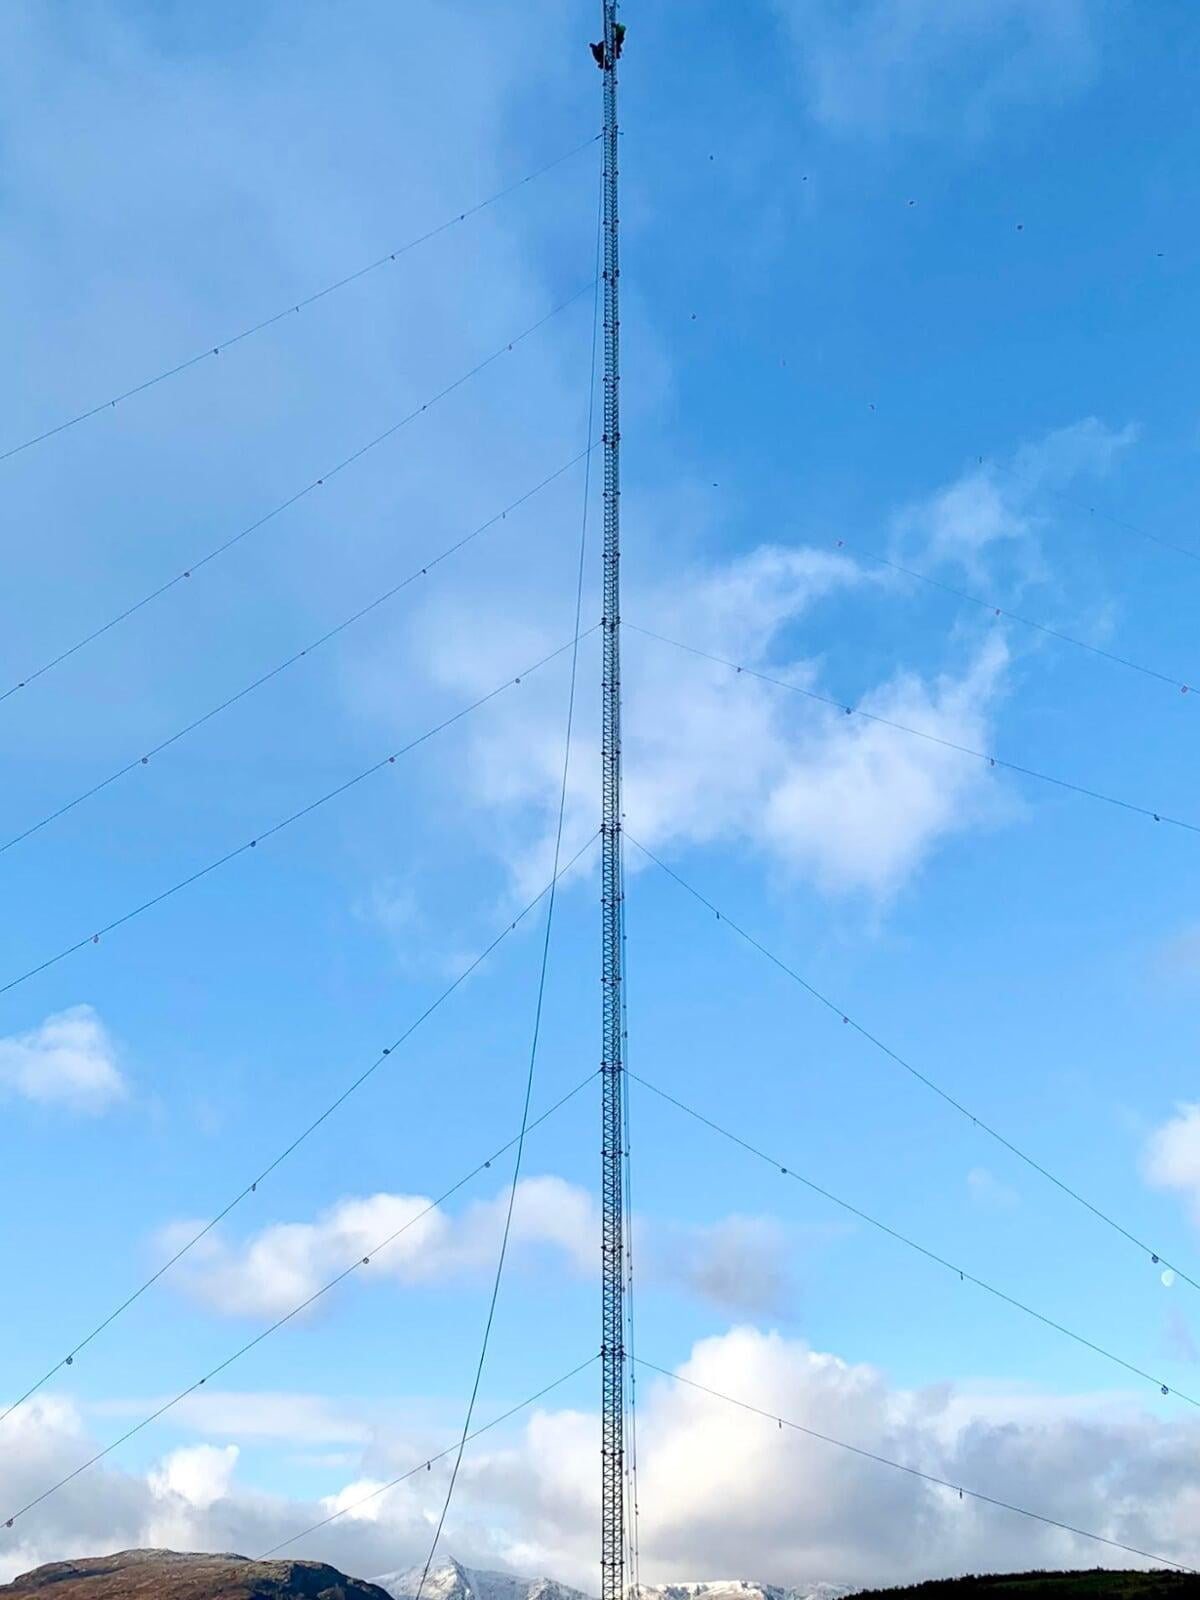 Introducing our new 100m SLX4/W-450 Met Mast